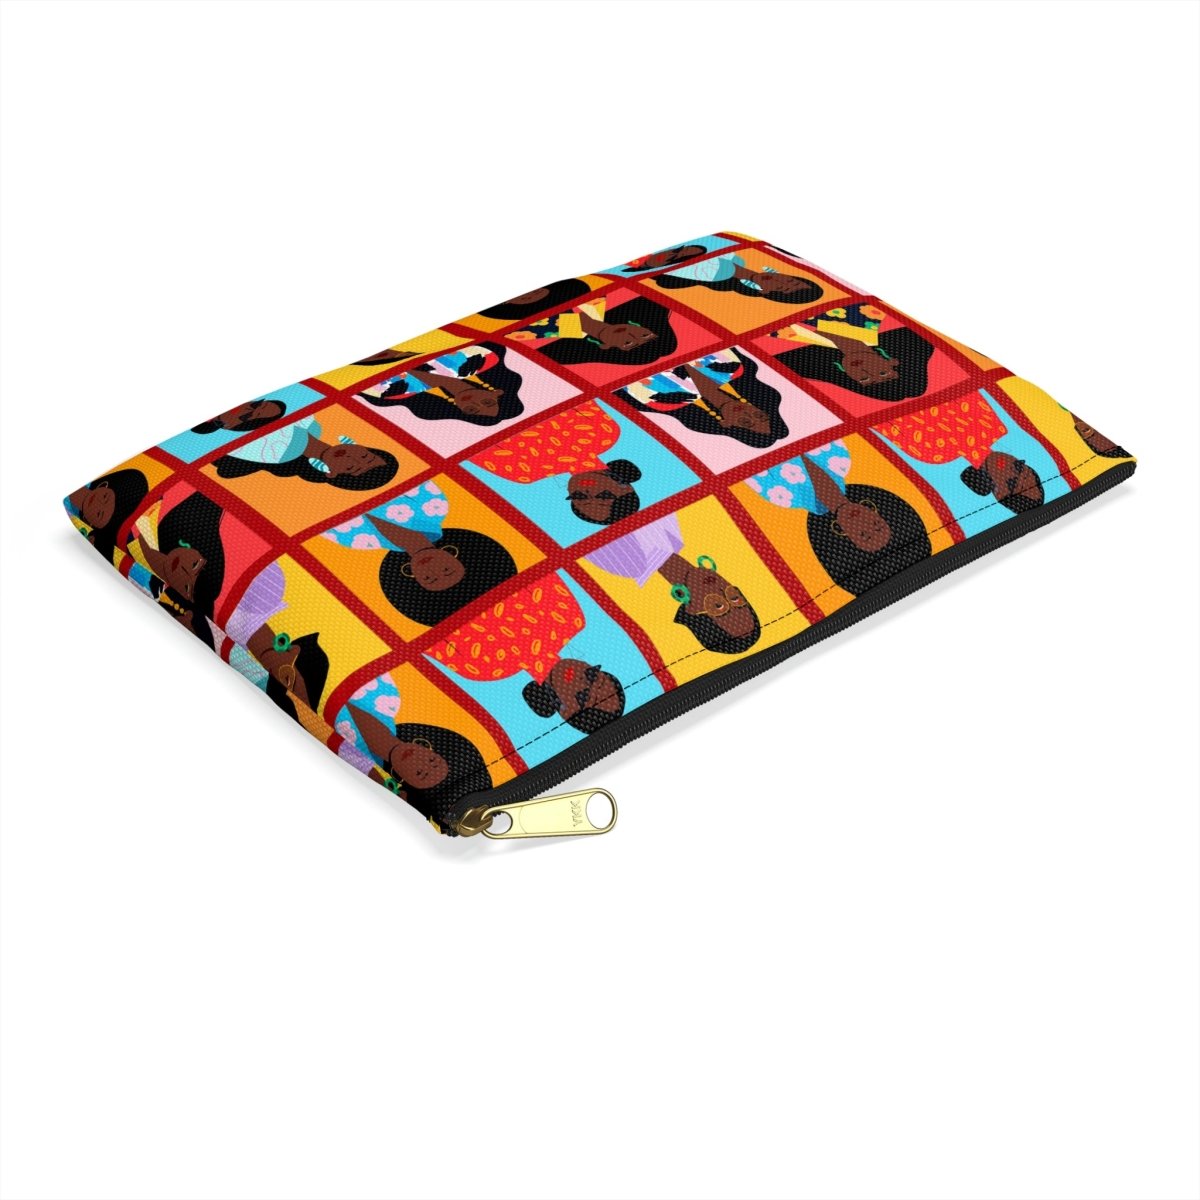 Women Squares Pouch - The Trini Gee